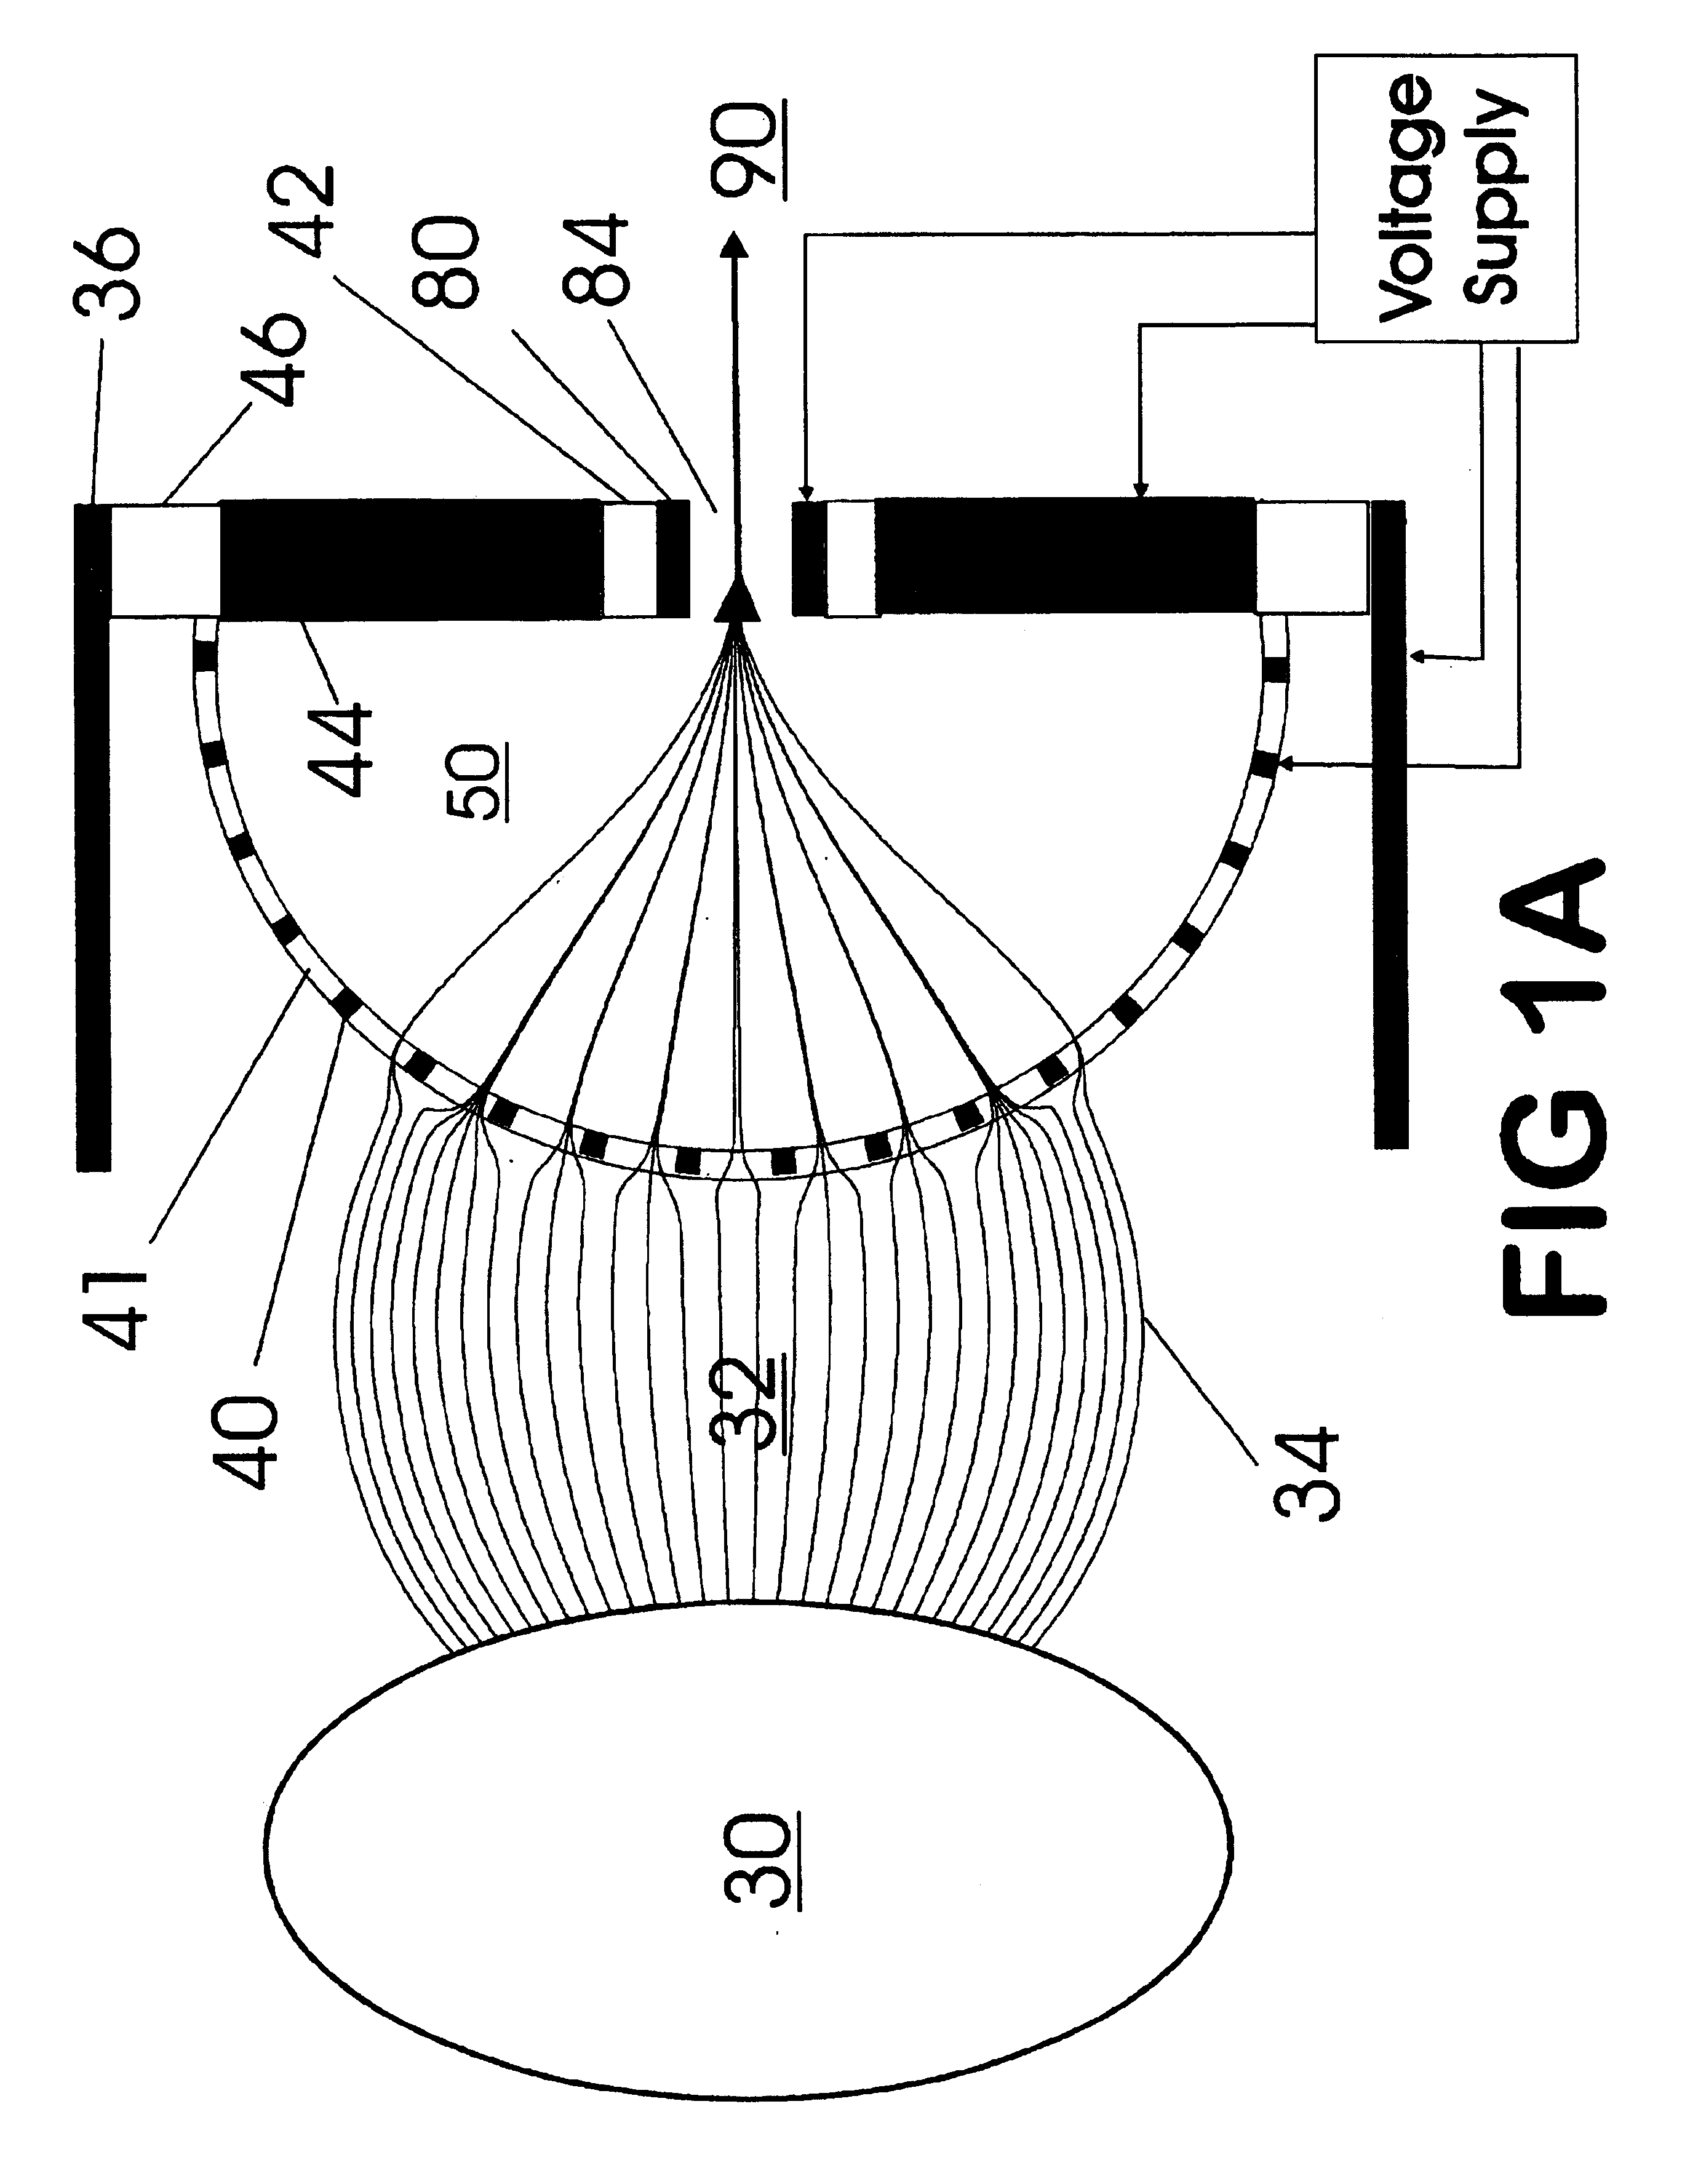 Apparatus and method for focusing ions and charged particles at atmospheric pressure